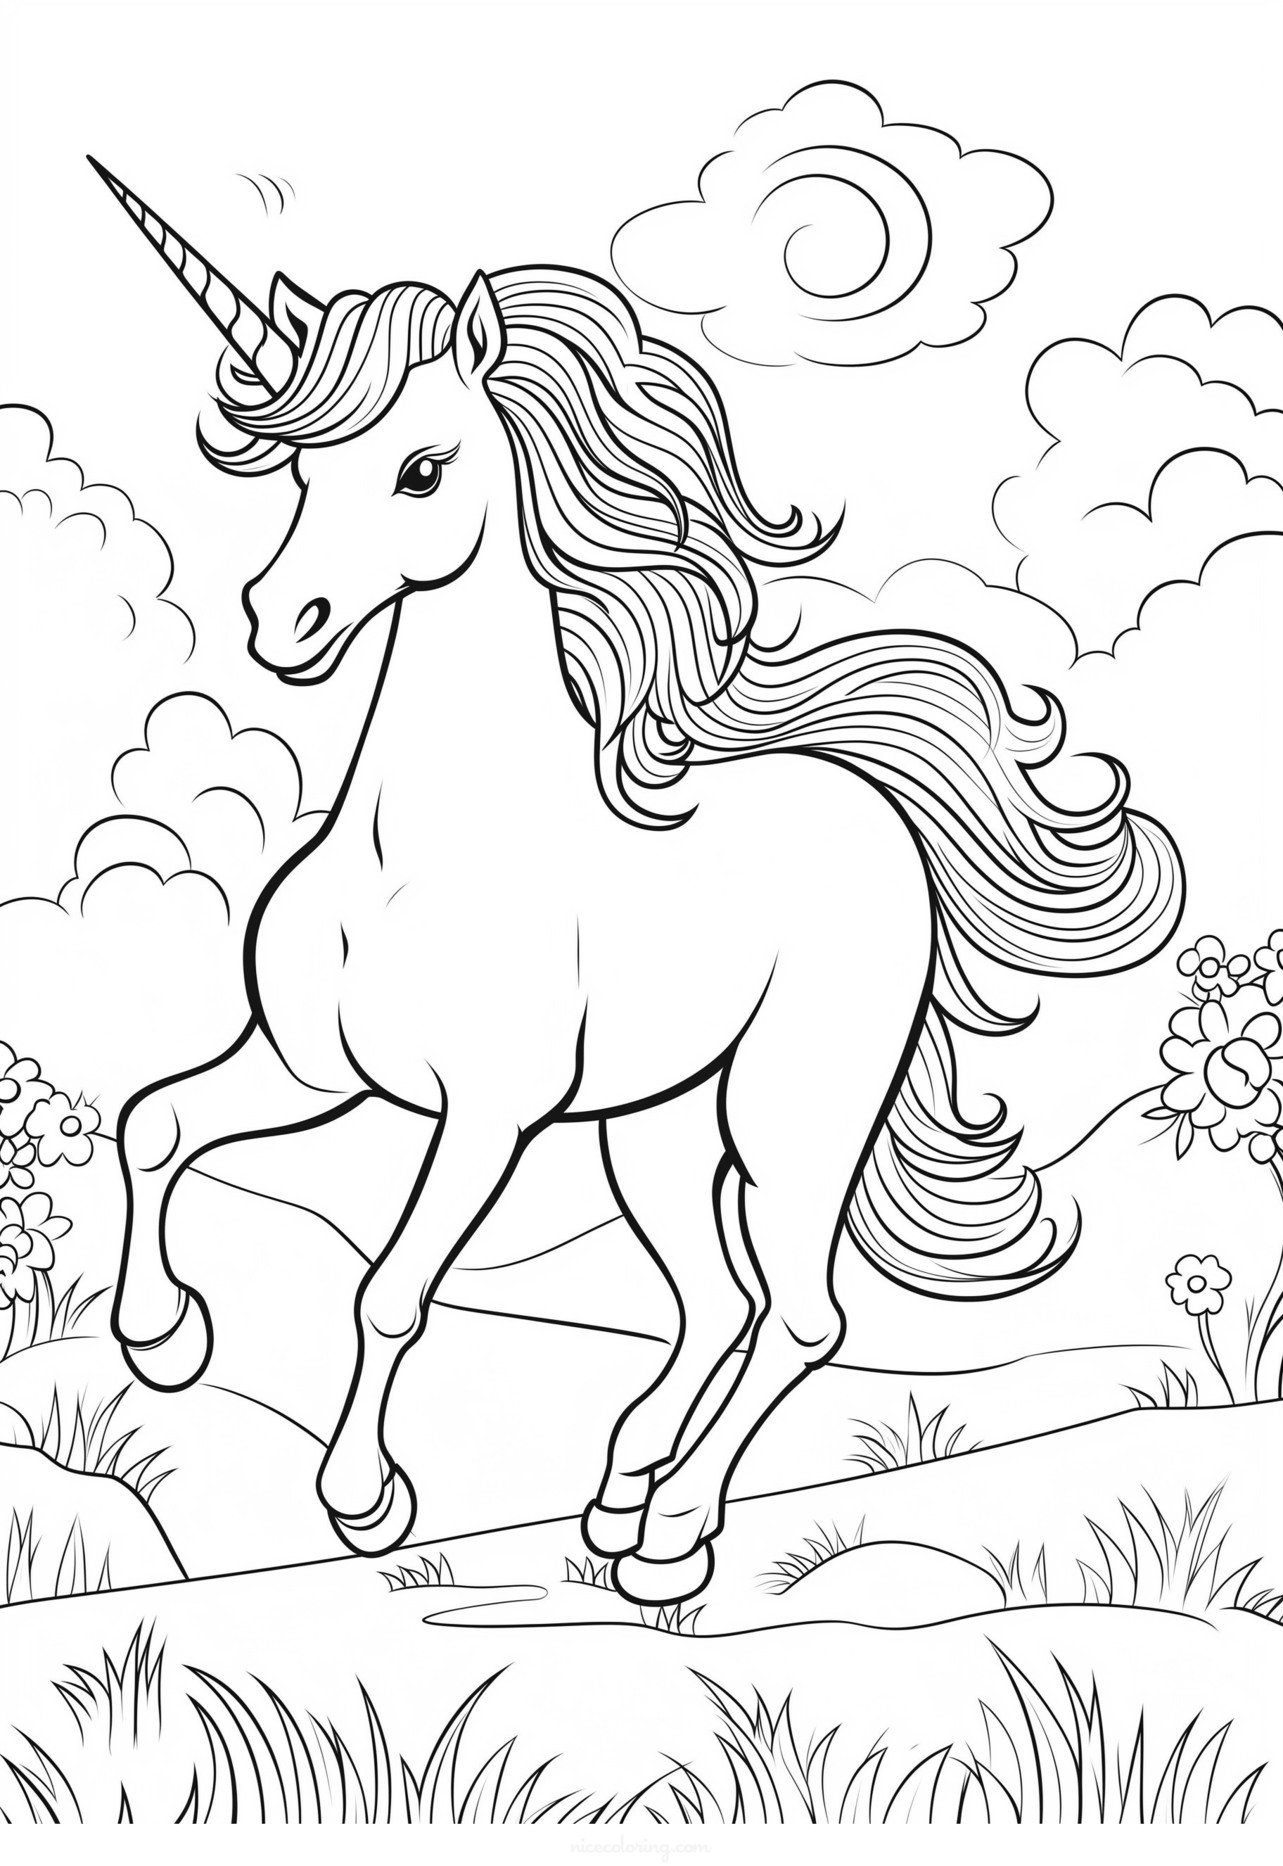 A unicorn in a magical forest coloring page